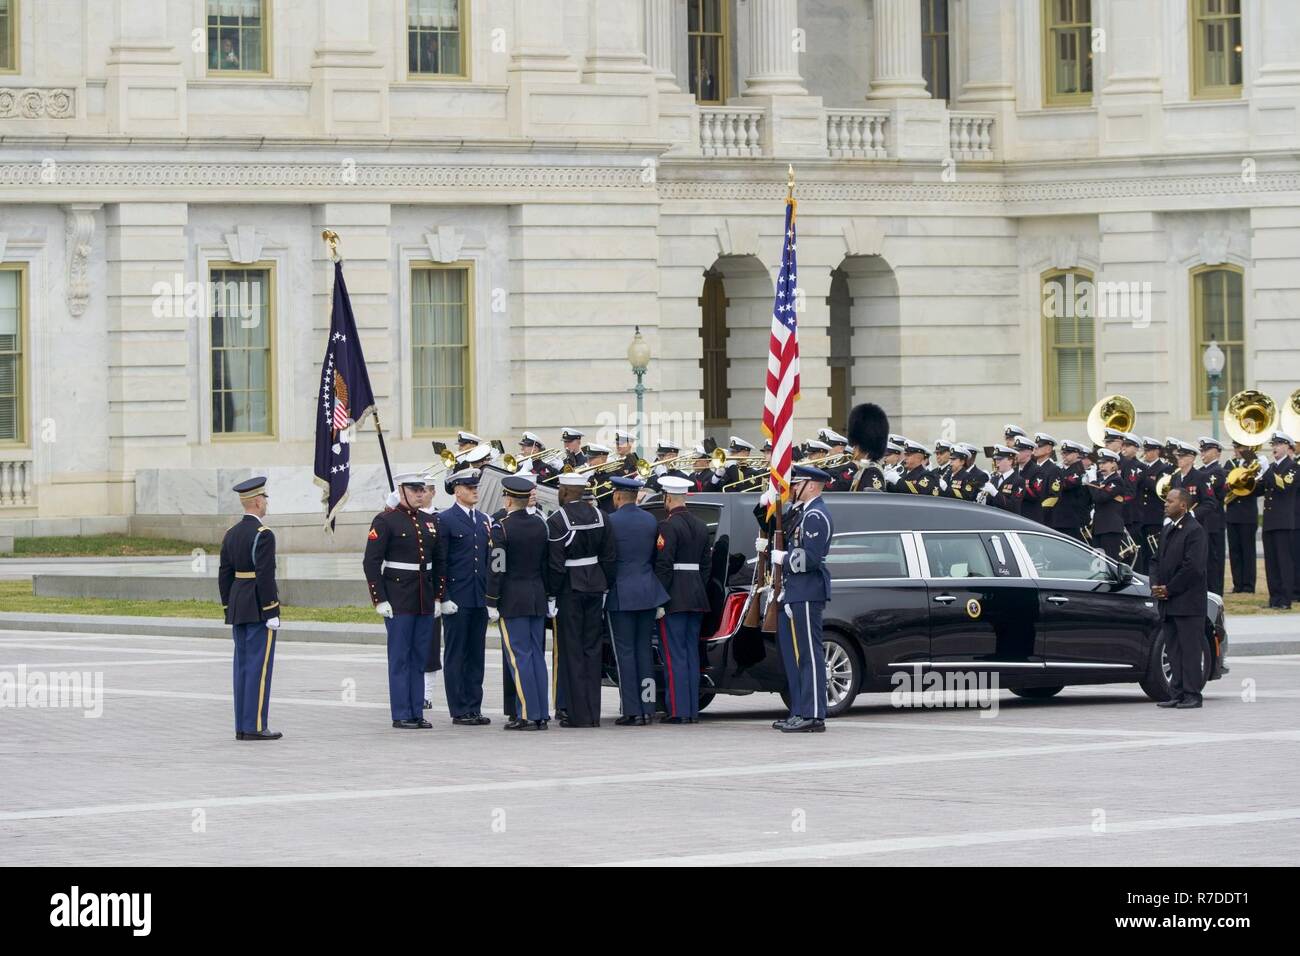 Joint Service Pallbearers representing the United States Army, Navy, Marine Corps, Air Force, and Coast Guard, lay the the flag-draped casket of George H.W. Bush, 41st President of the United States, in a hearse at the United States Capitol, Washington, D.C., Dec. 5, 2018. Nearly 4,000 military and civilian personnel from across all branches of the U.S. armed forces, including Reserve and National Guard Components, provided ceremonial support during George H.W. Bush’s, the 41st President of the United States state funeral. (DoD Stock Photo